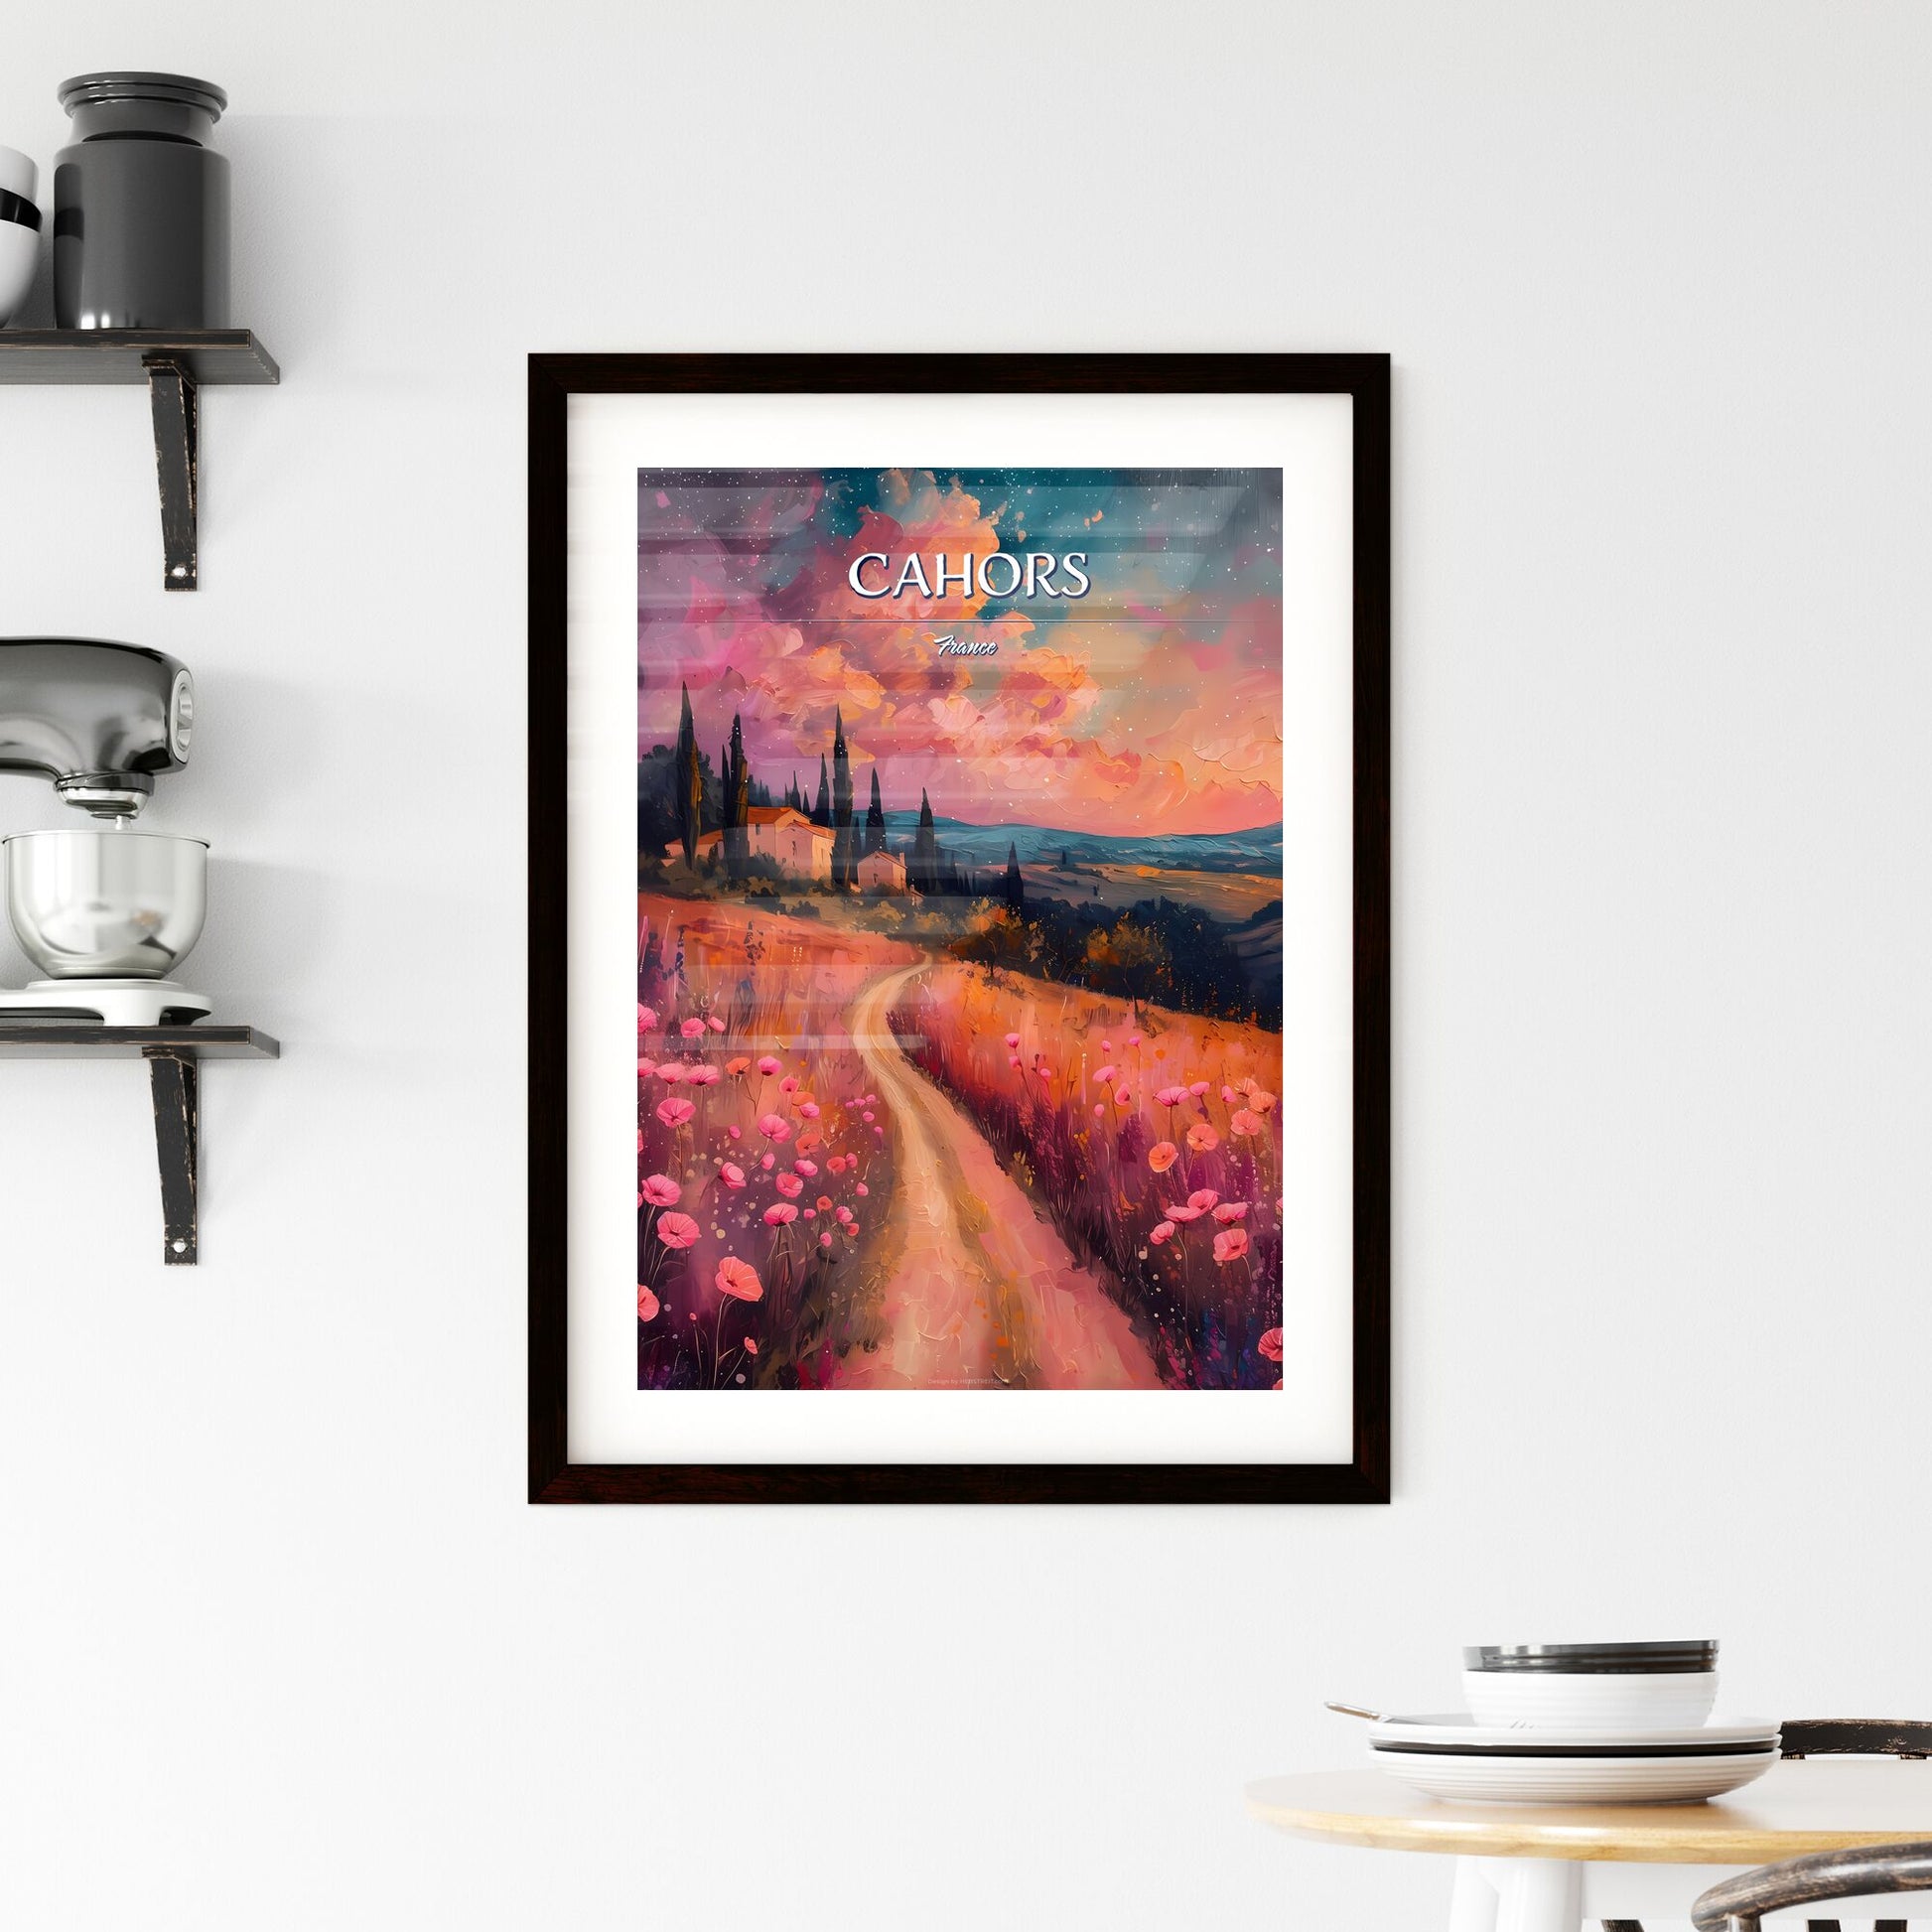 Cahors, France - Art print of a painting of a road in a field with flowers Default Title